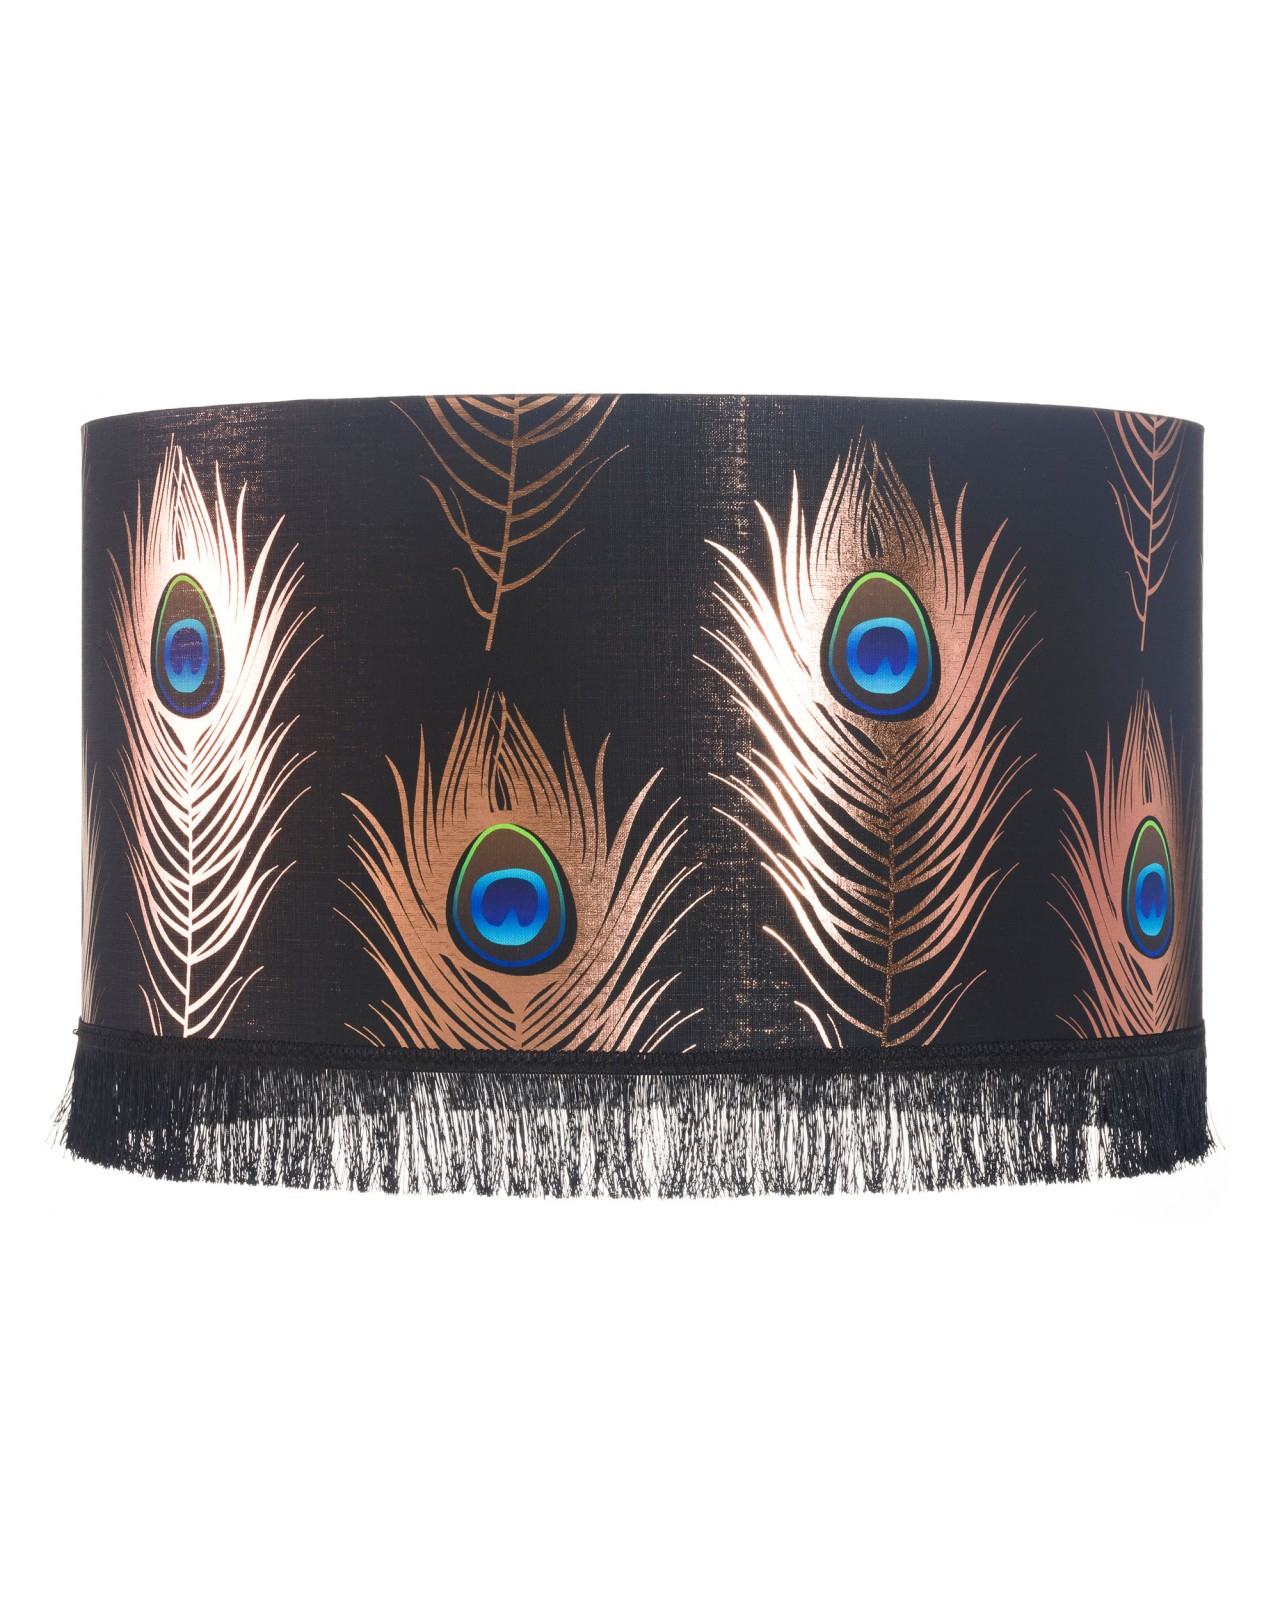 PEACOCK FEATHERS Lampshade